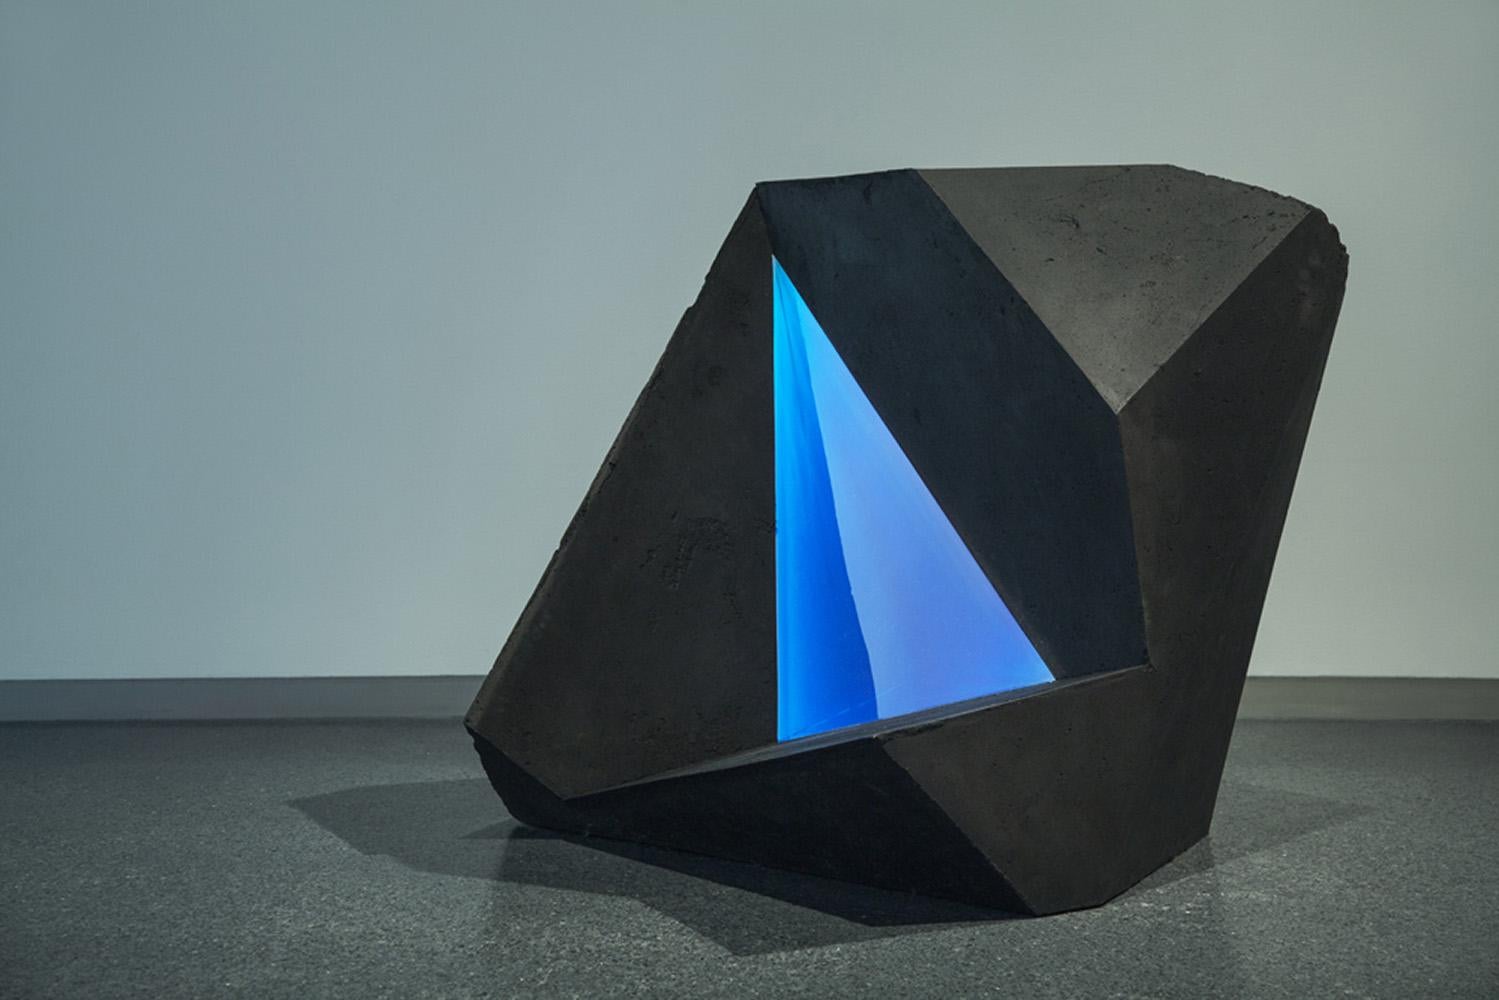 Coal, polyester resin, Jesmonite. 100 cm × 100 cm × 100 cm.
The artist created the Carbon Voids series by combining various geometric ‘positive’ (creating solids) and ‘negative’ (creating voids) shapes. In Carbon Void Blue, a resin triangle is